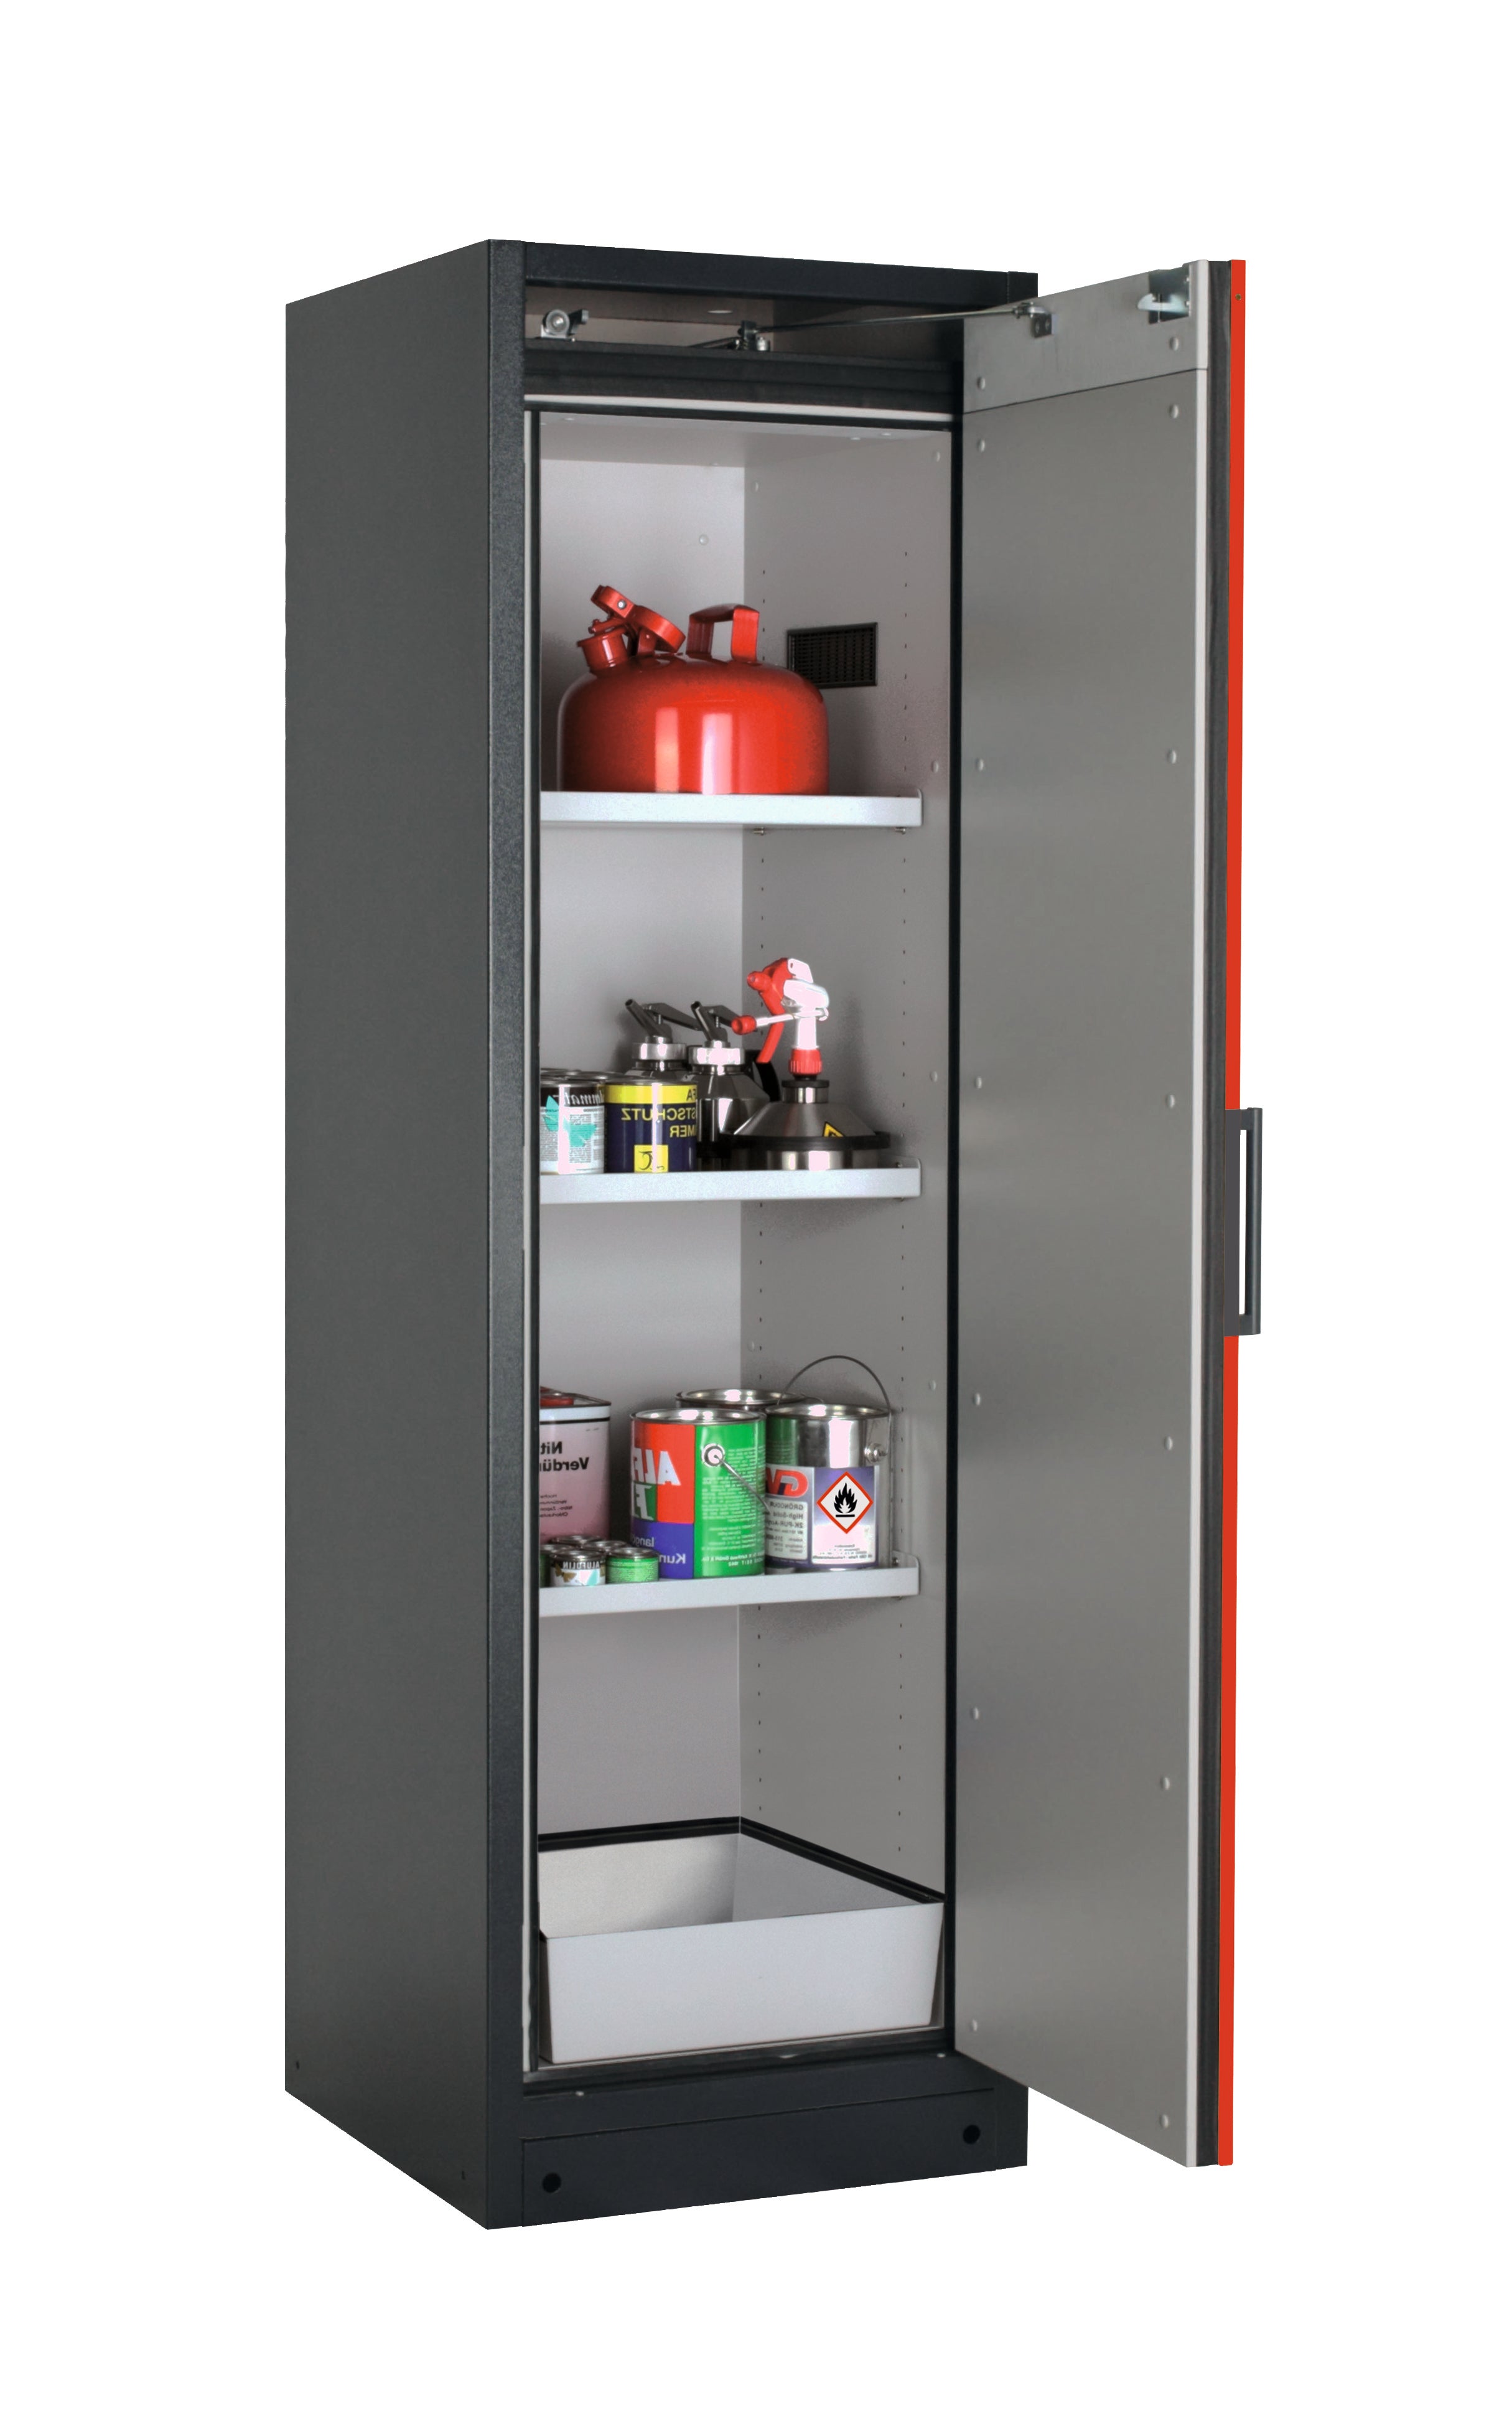 Type 90 safety storage cabinet Q-CLASSIC-90 model Q90.195.060.R in traffic red RAL 3020 with 3x shelf standard (sheet steel),